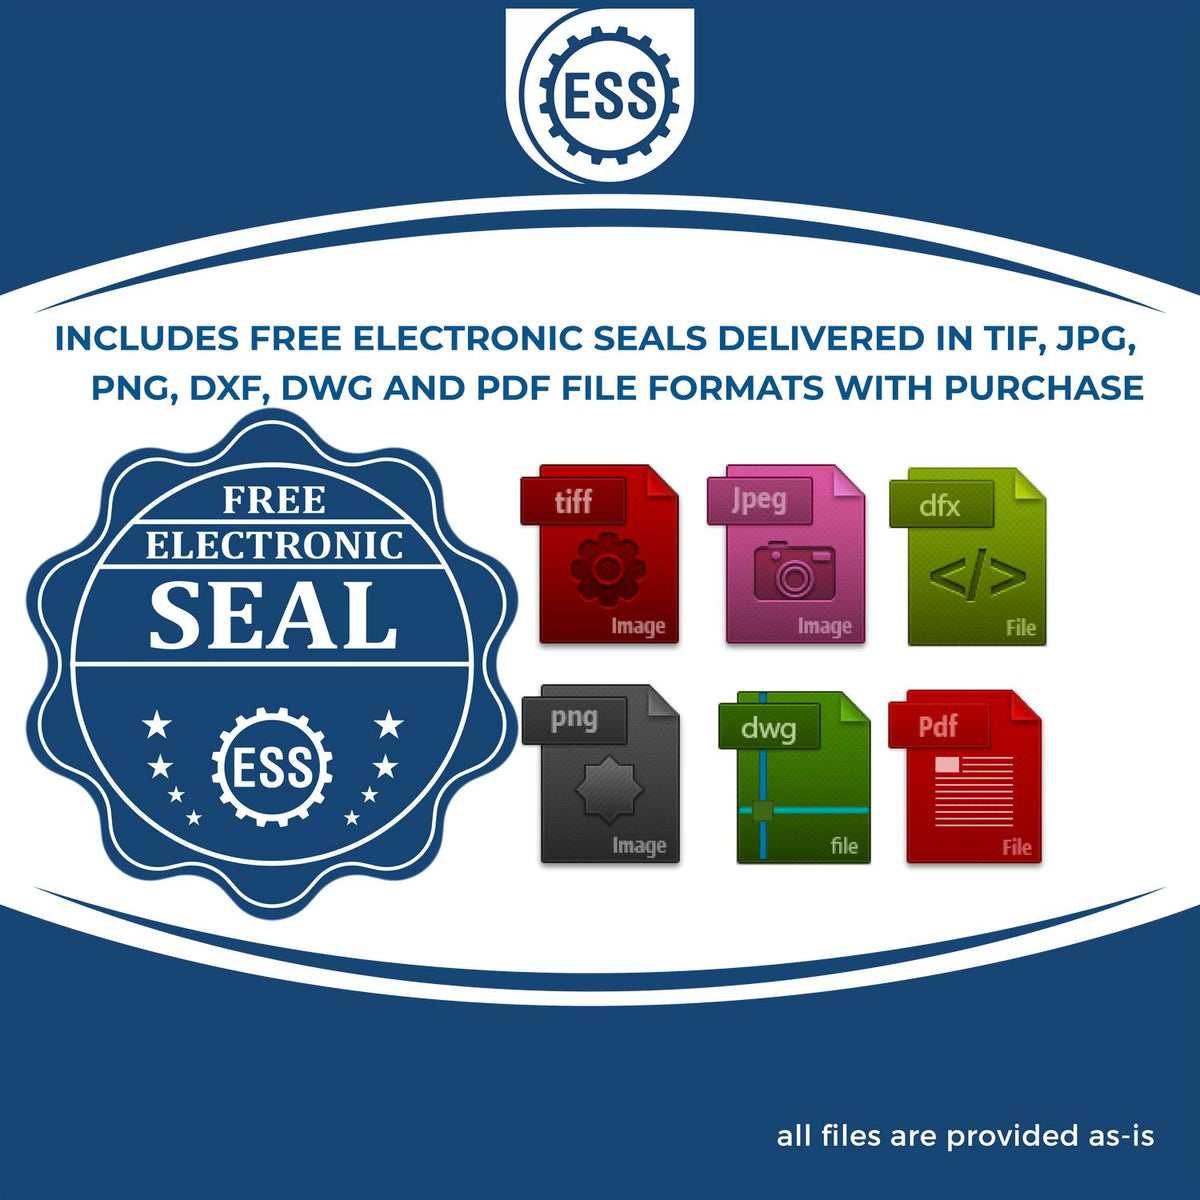 An infographic for the free electronic seal for the Hybrid Nevada Geologist Seal illustrating the different file type icons such as DXF, DWG, TIF, JPG and PNG.